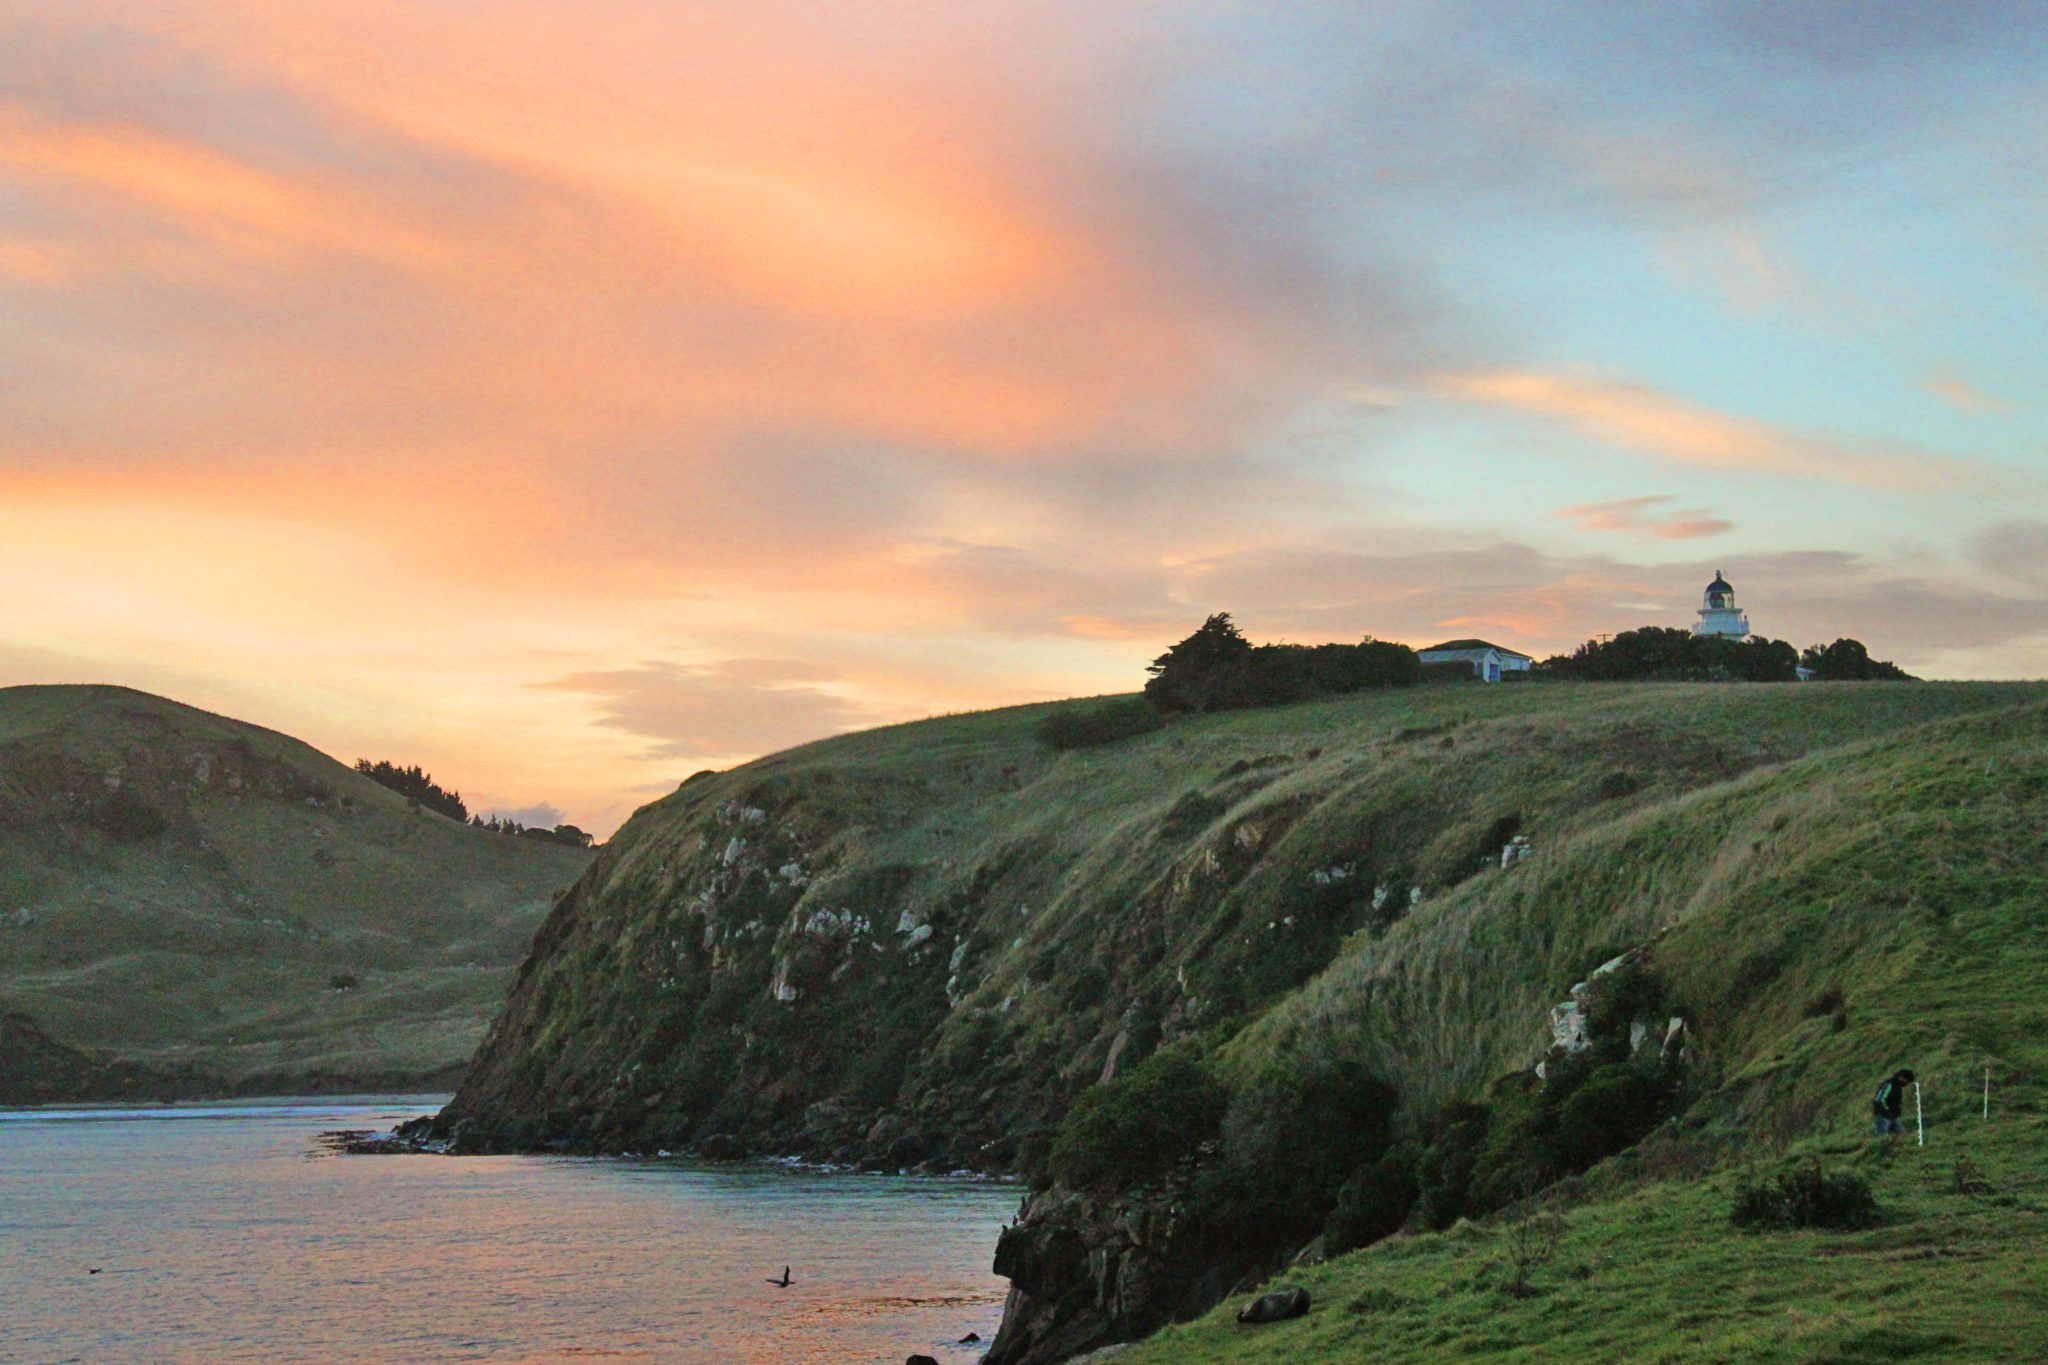 Katiki Point Lighthouse is one of the best places to see penguins and wildlife on the South Island-  Visit these 17 underrated spots on New Zealand's South Island #newzealand #southisland #katikipointlighthouse